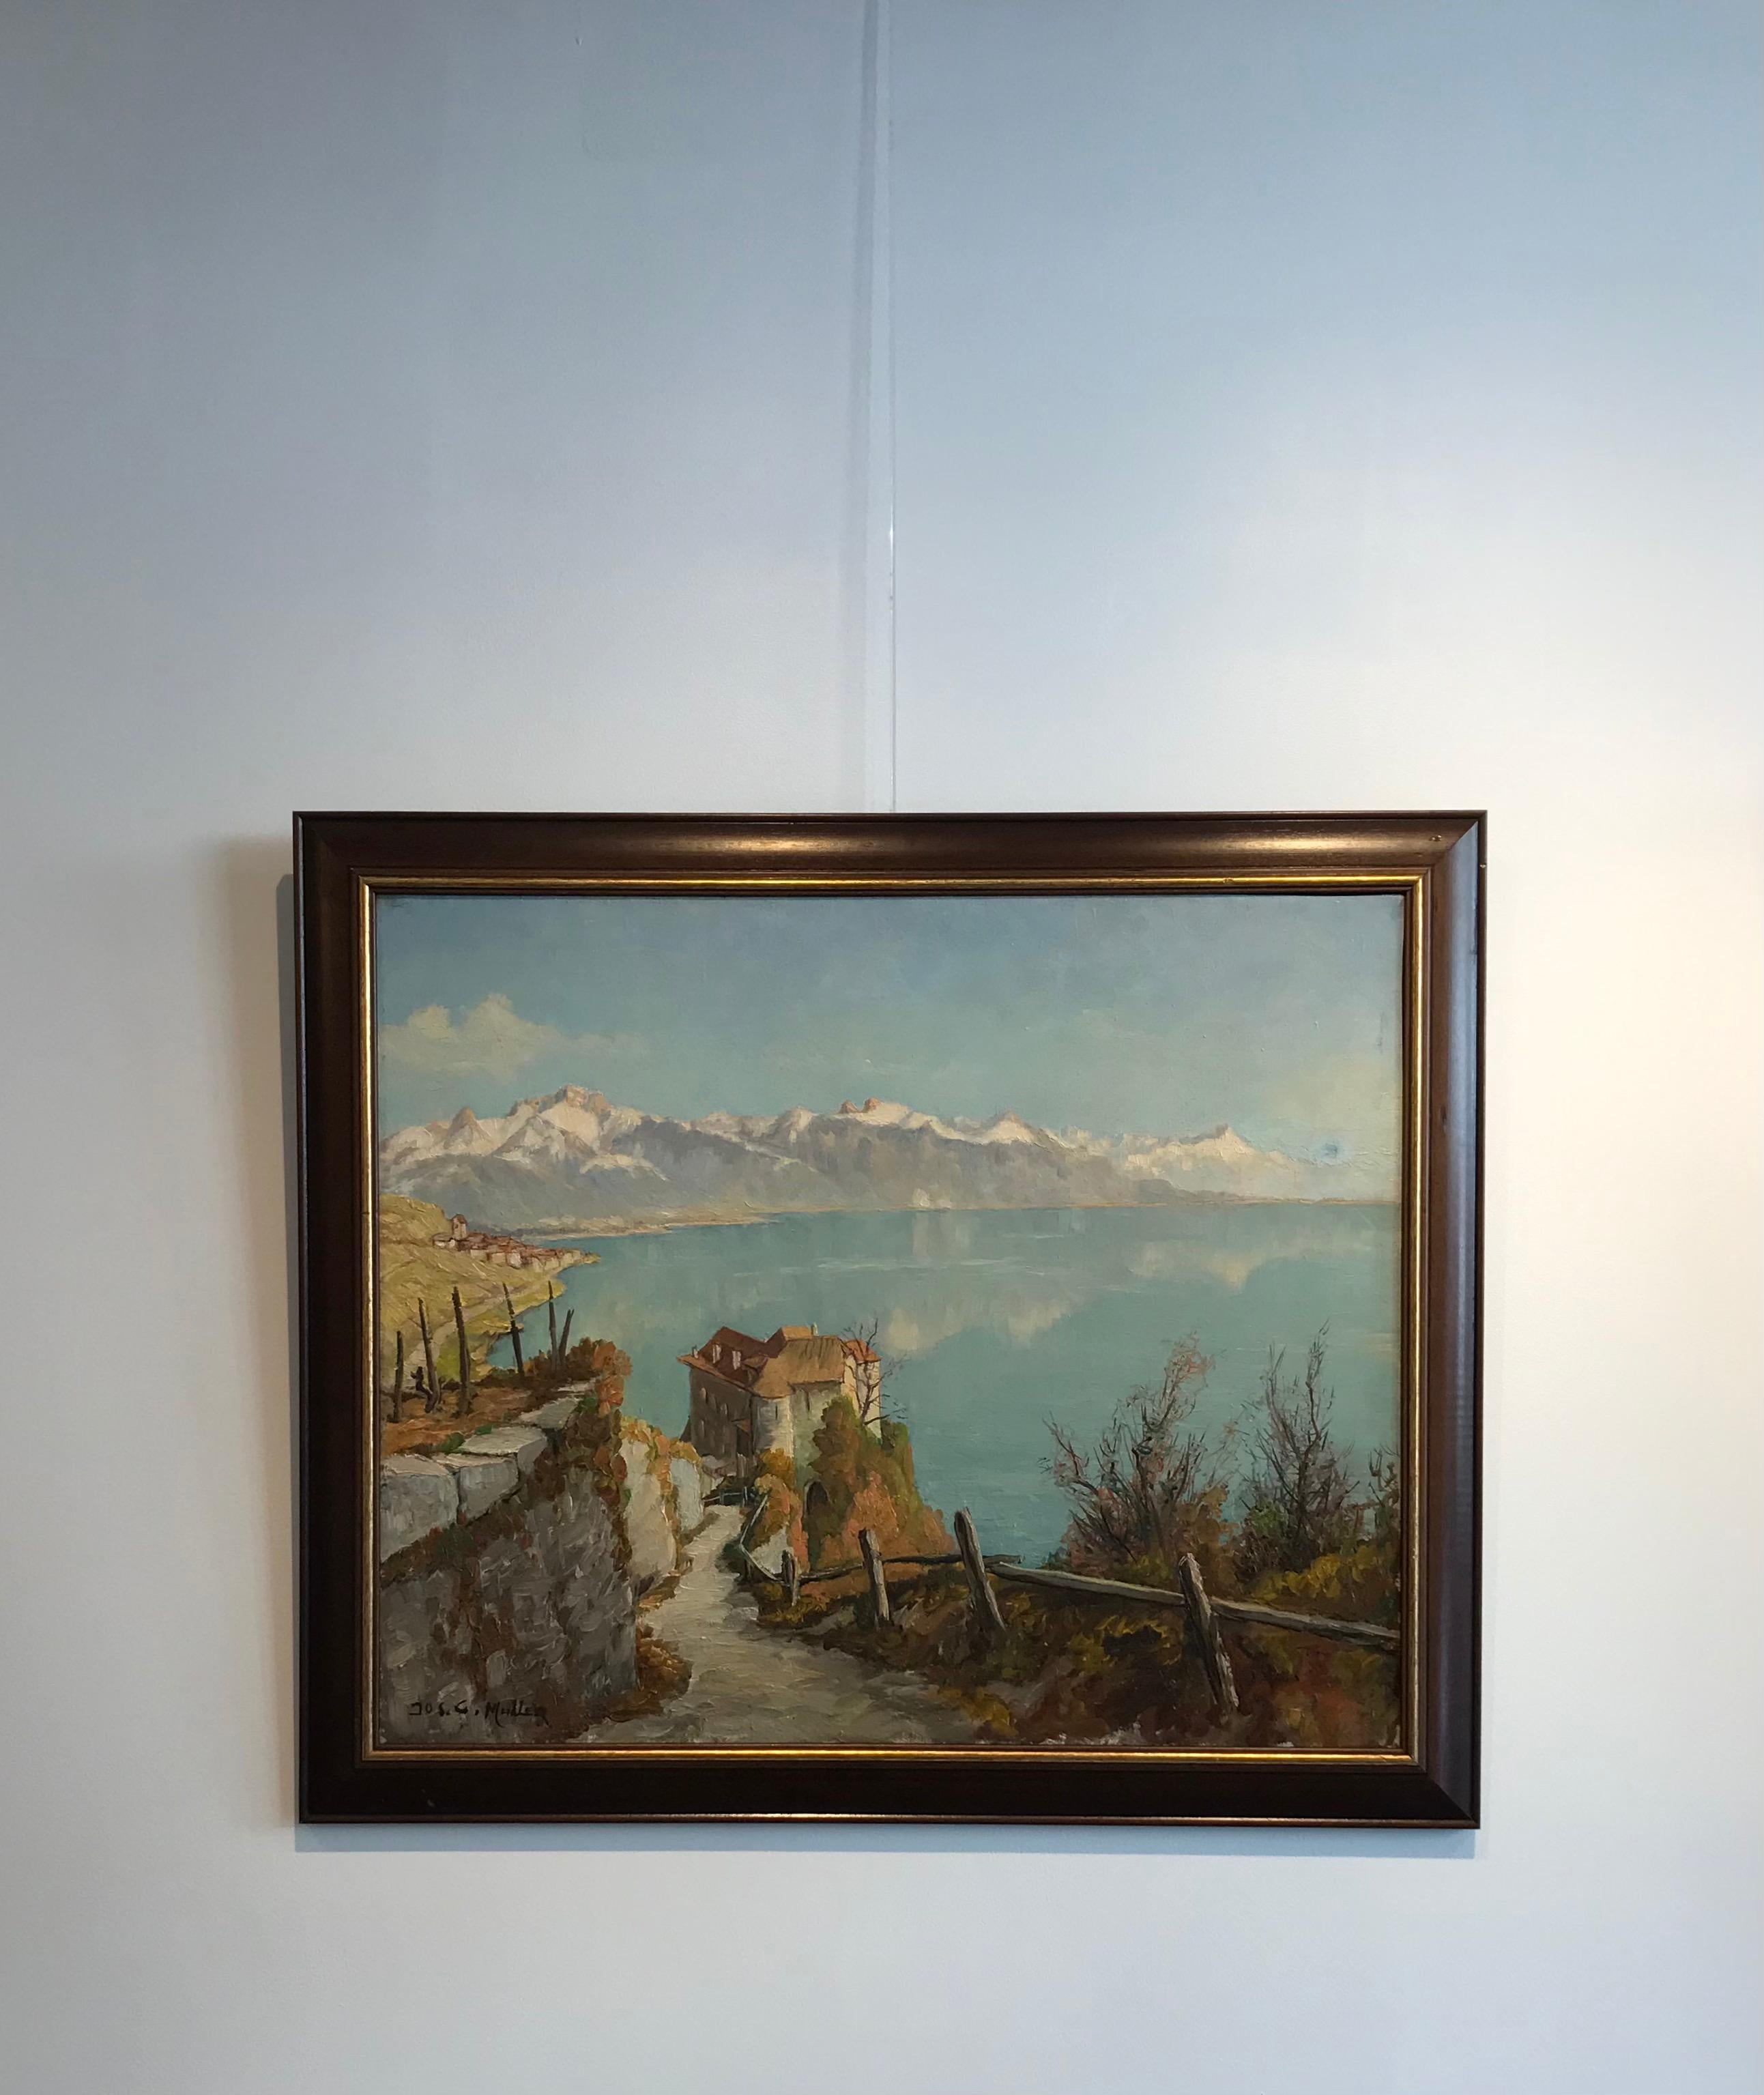 Castle view by Joseph Muller - Oil on canvas 65x54 cm - Painting by Joseph G. Muller